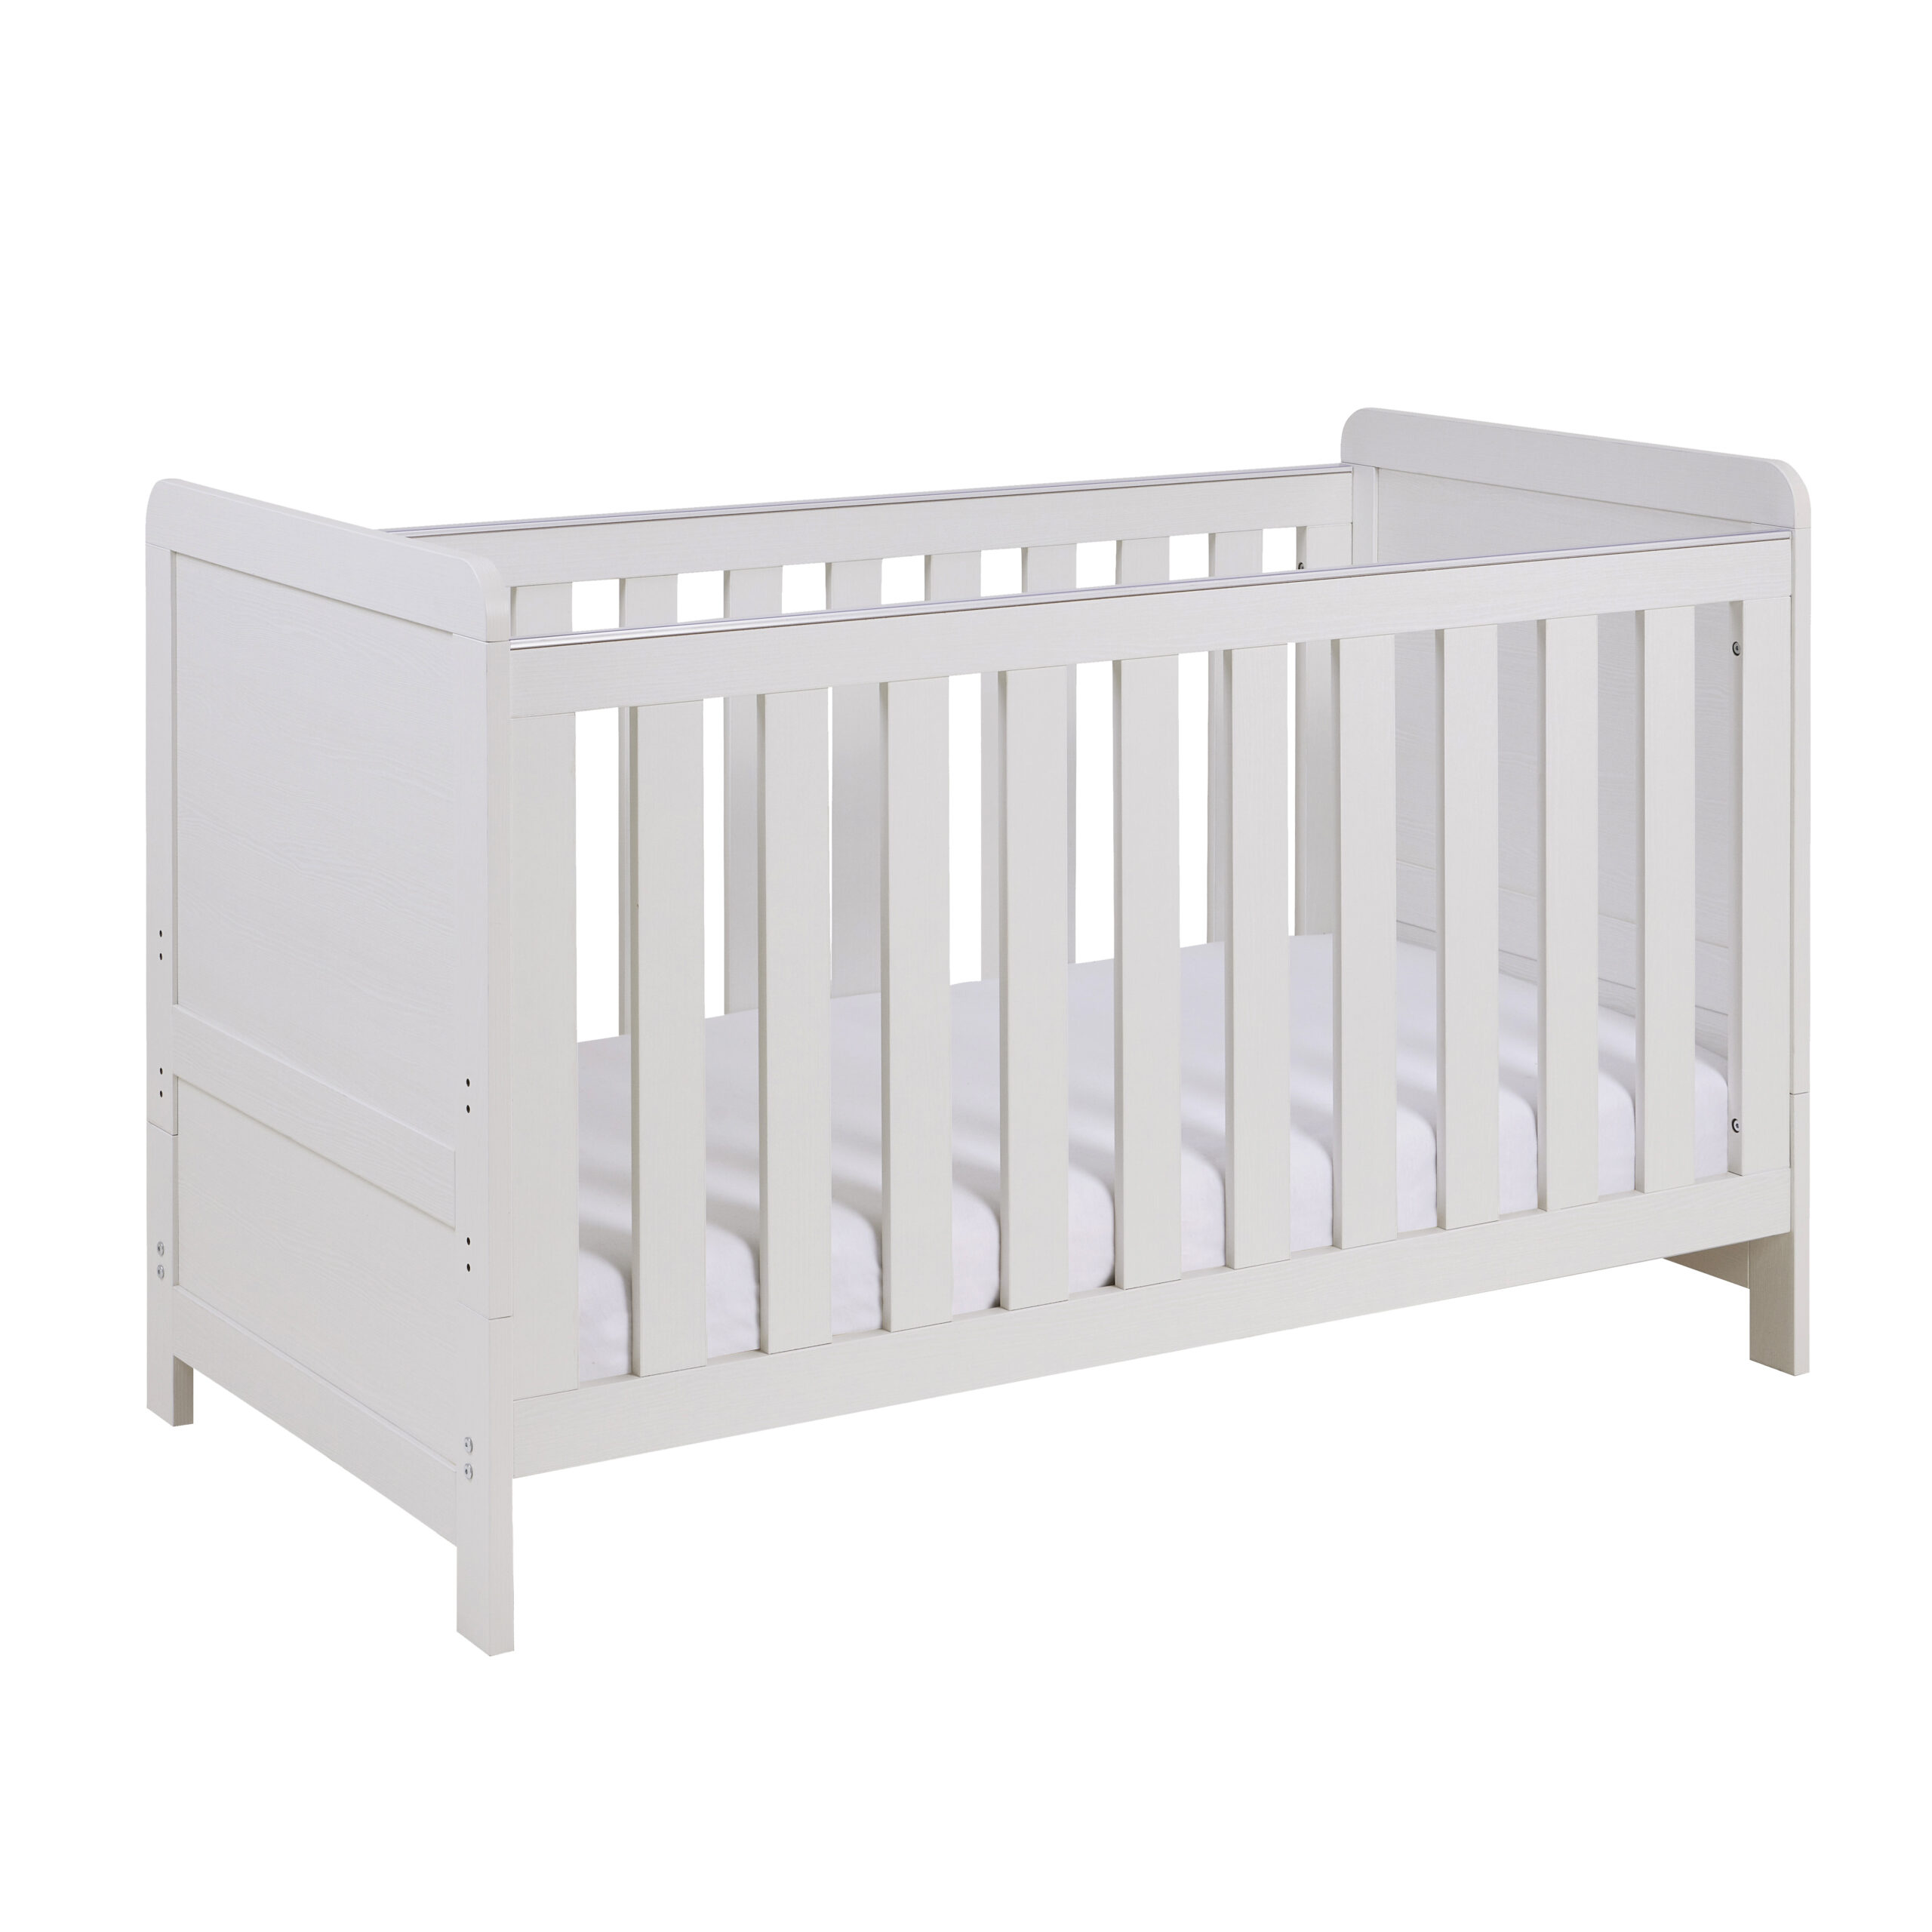 Baby cot bed, White, Wood, Cerise